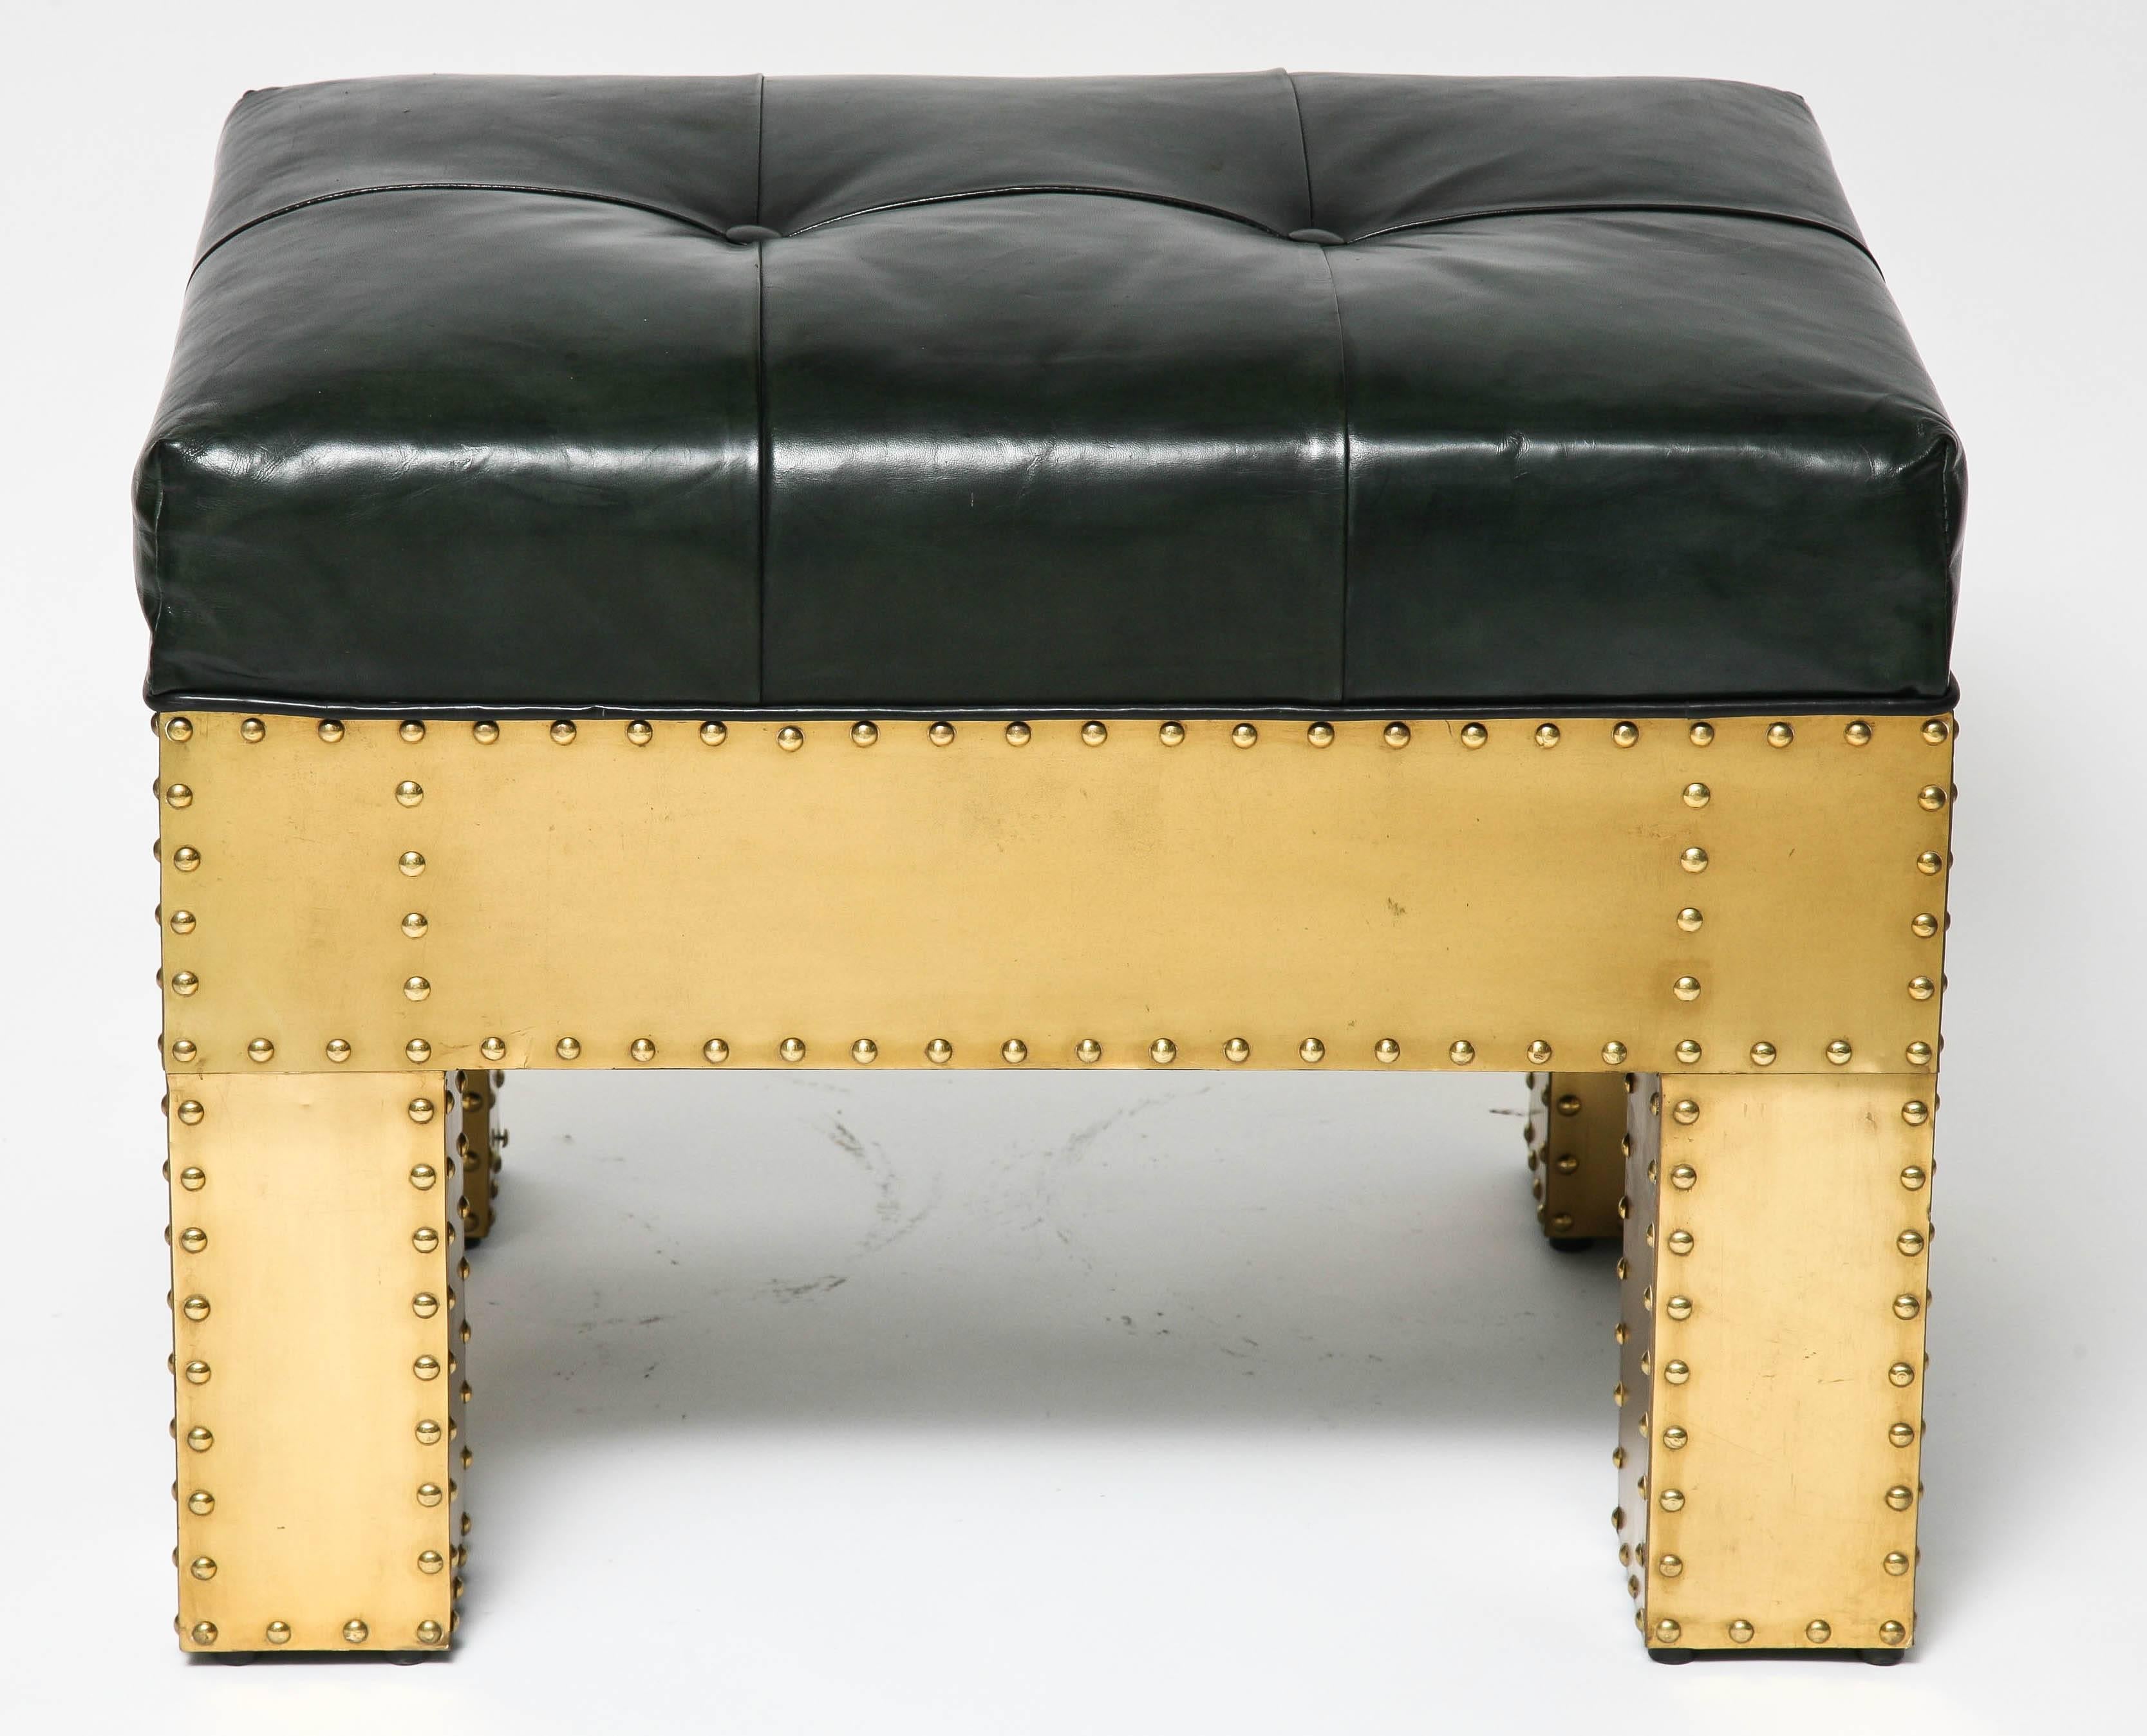 This handsome bench was created in the 1970s by the firm Sarreid Ltd. The frame in constructed of brass panels with brass studs and the upholstery is in a dark black leather with button-tufted detail.

For best net trade price or additional